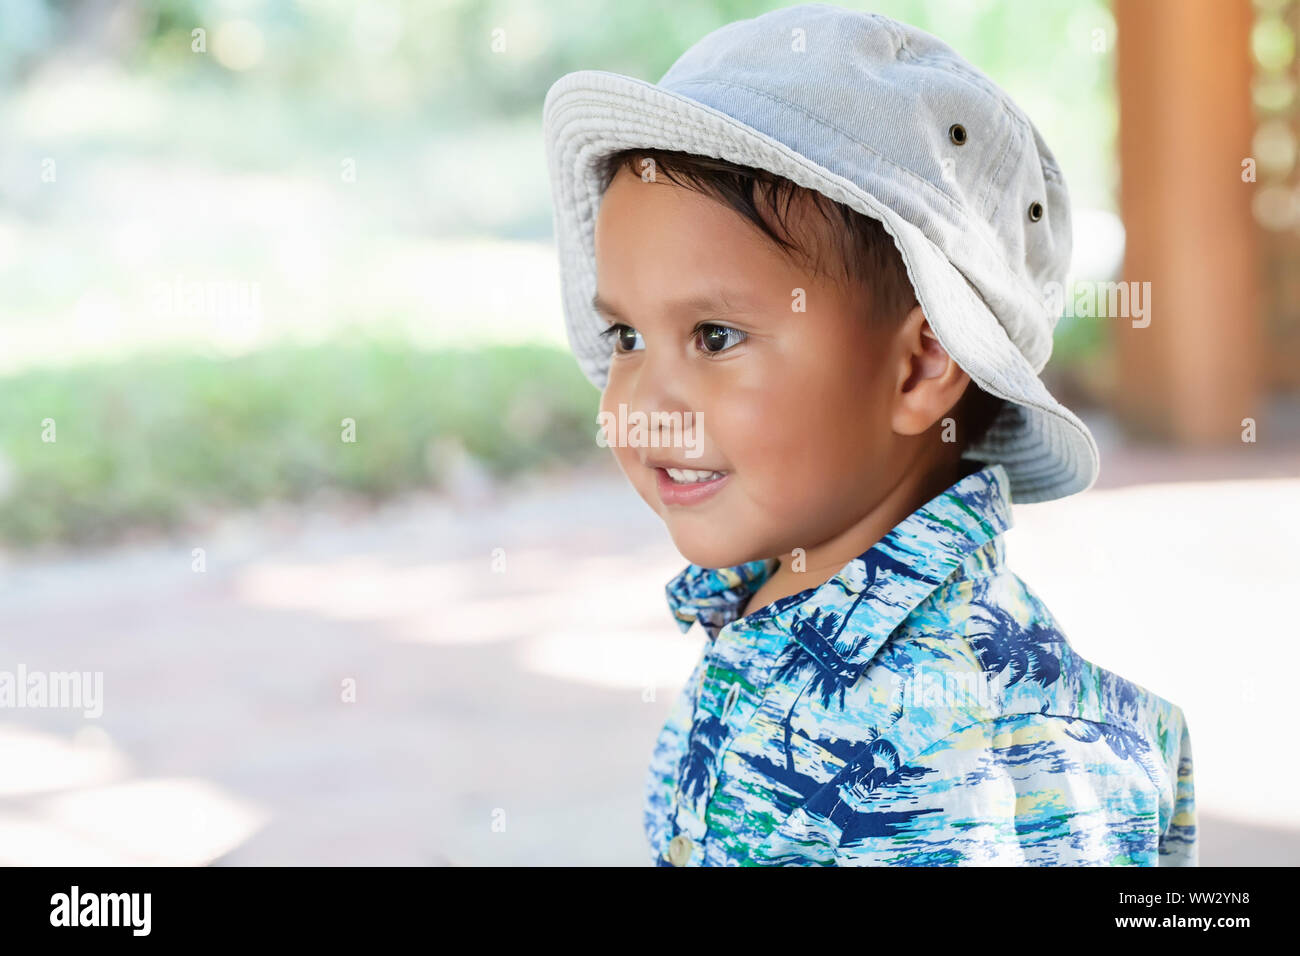 A little kid; 3 year old, wearing a hat and hawaiian print shirt, looking off into the distance with a cute smile on face. Stock Photo